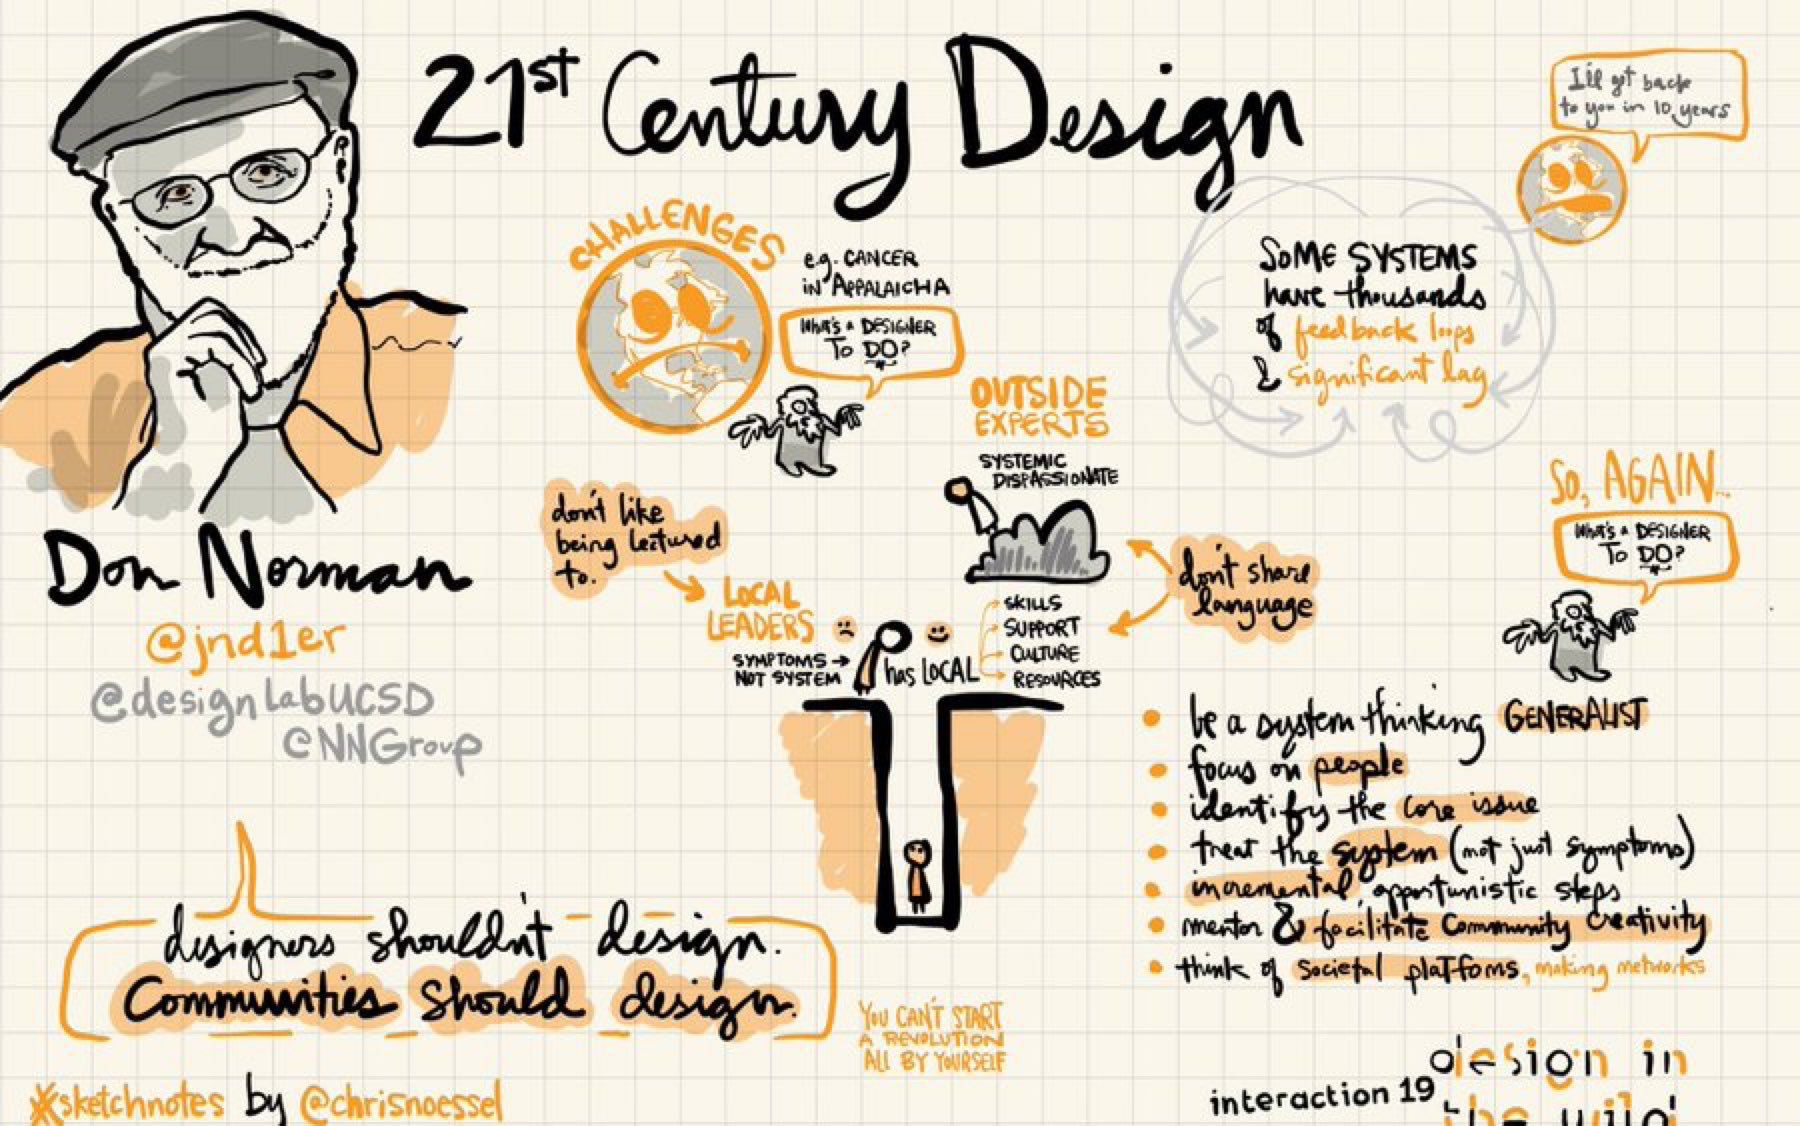 Don Norman sketchnote from DesignLab UCSD